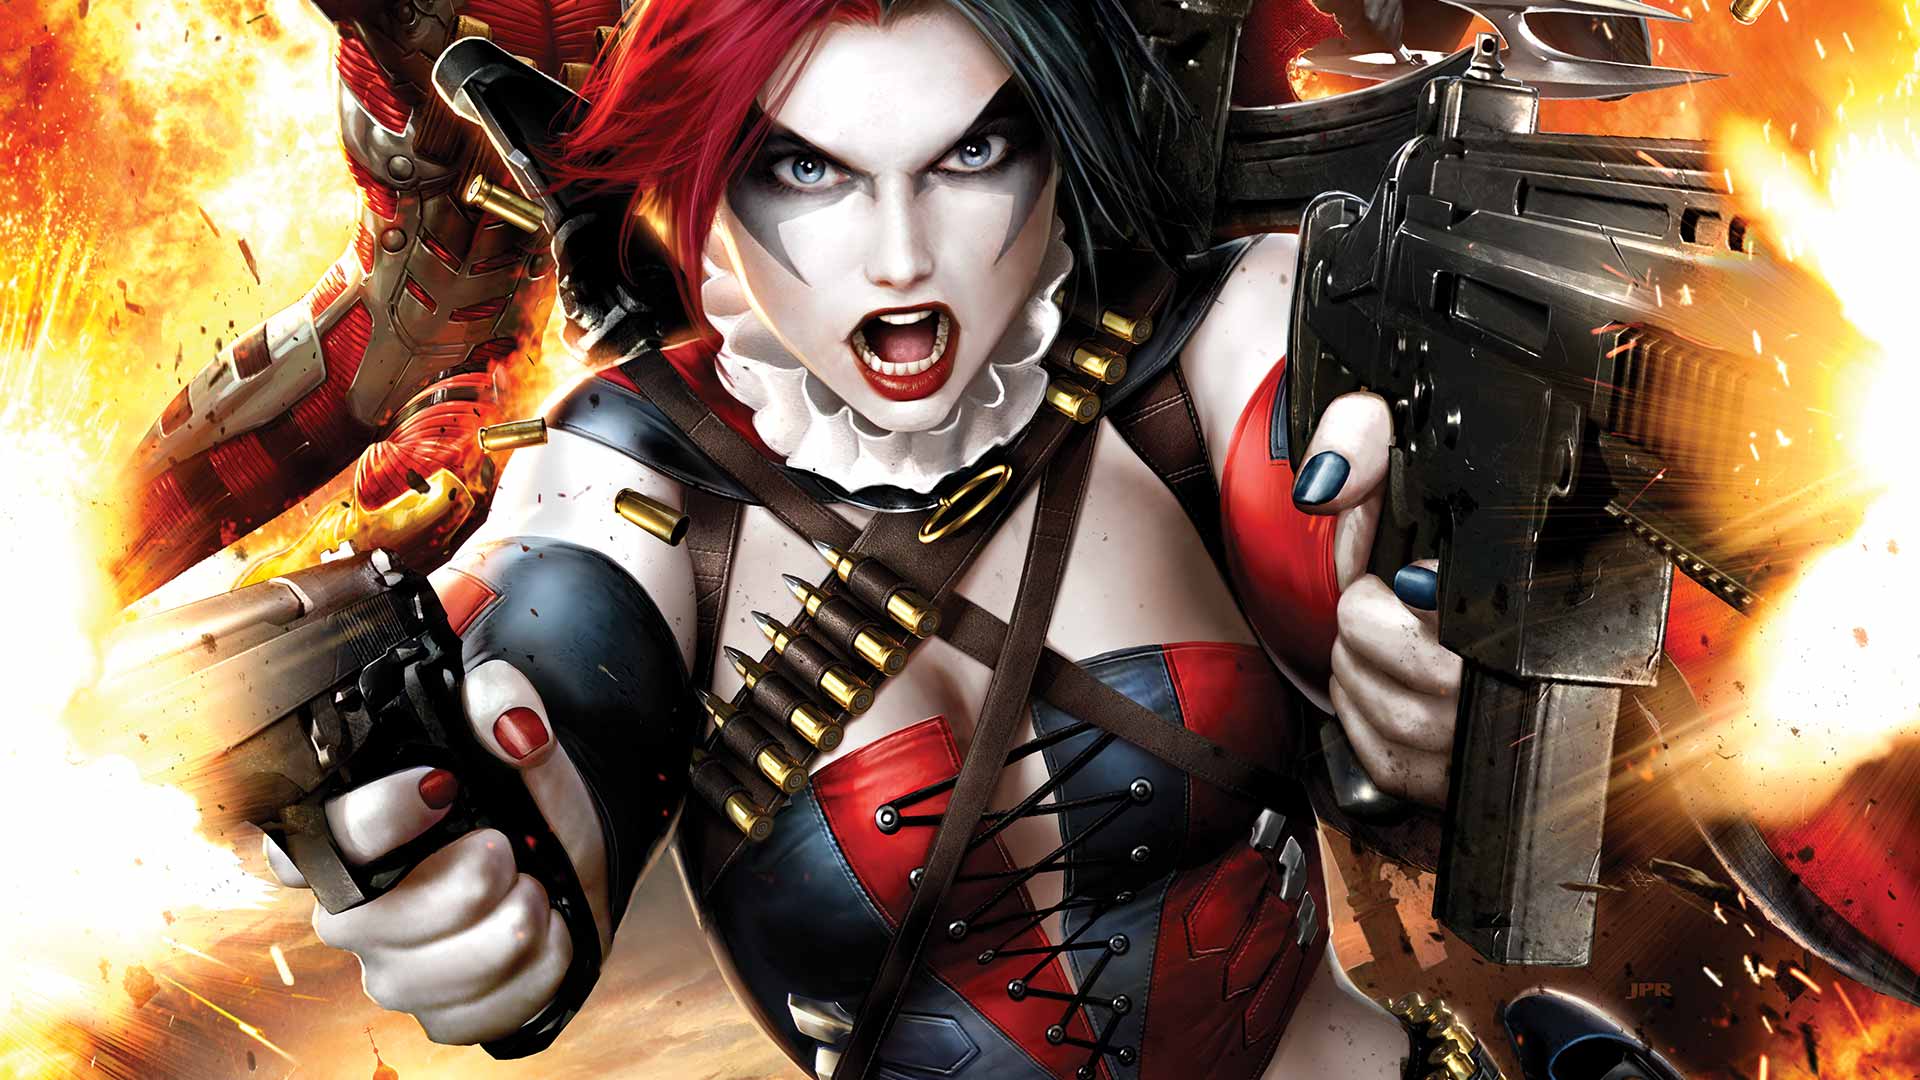 New 52 Harley Quinn Wallpapers